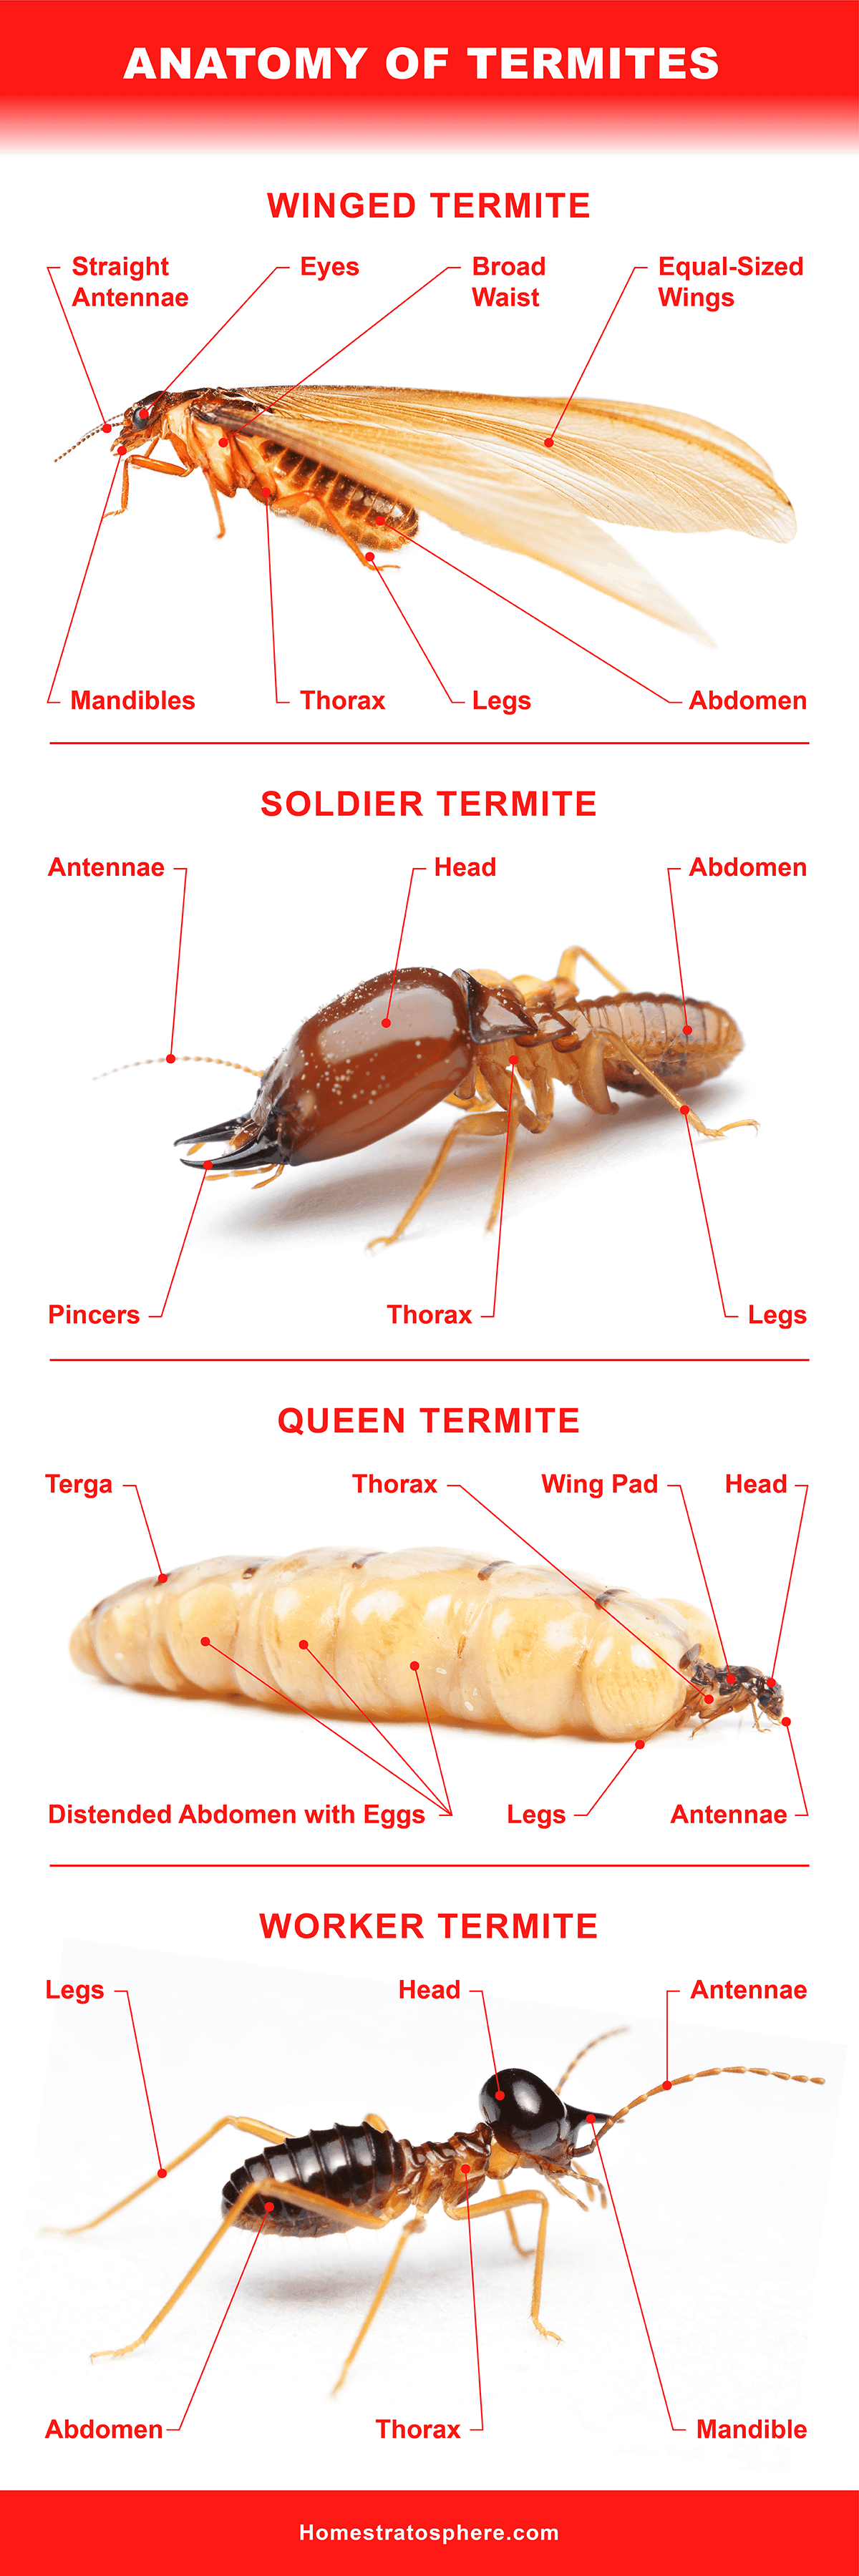 Different Types of Termites Eating Houses All Over the World